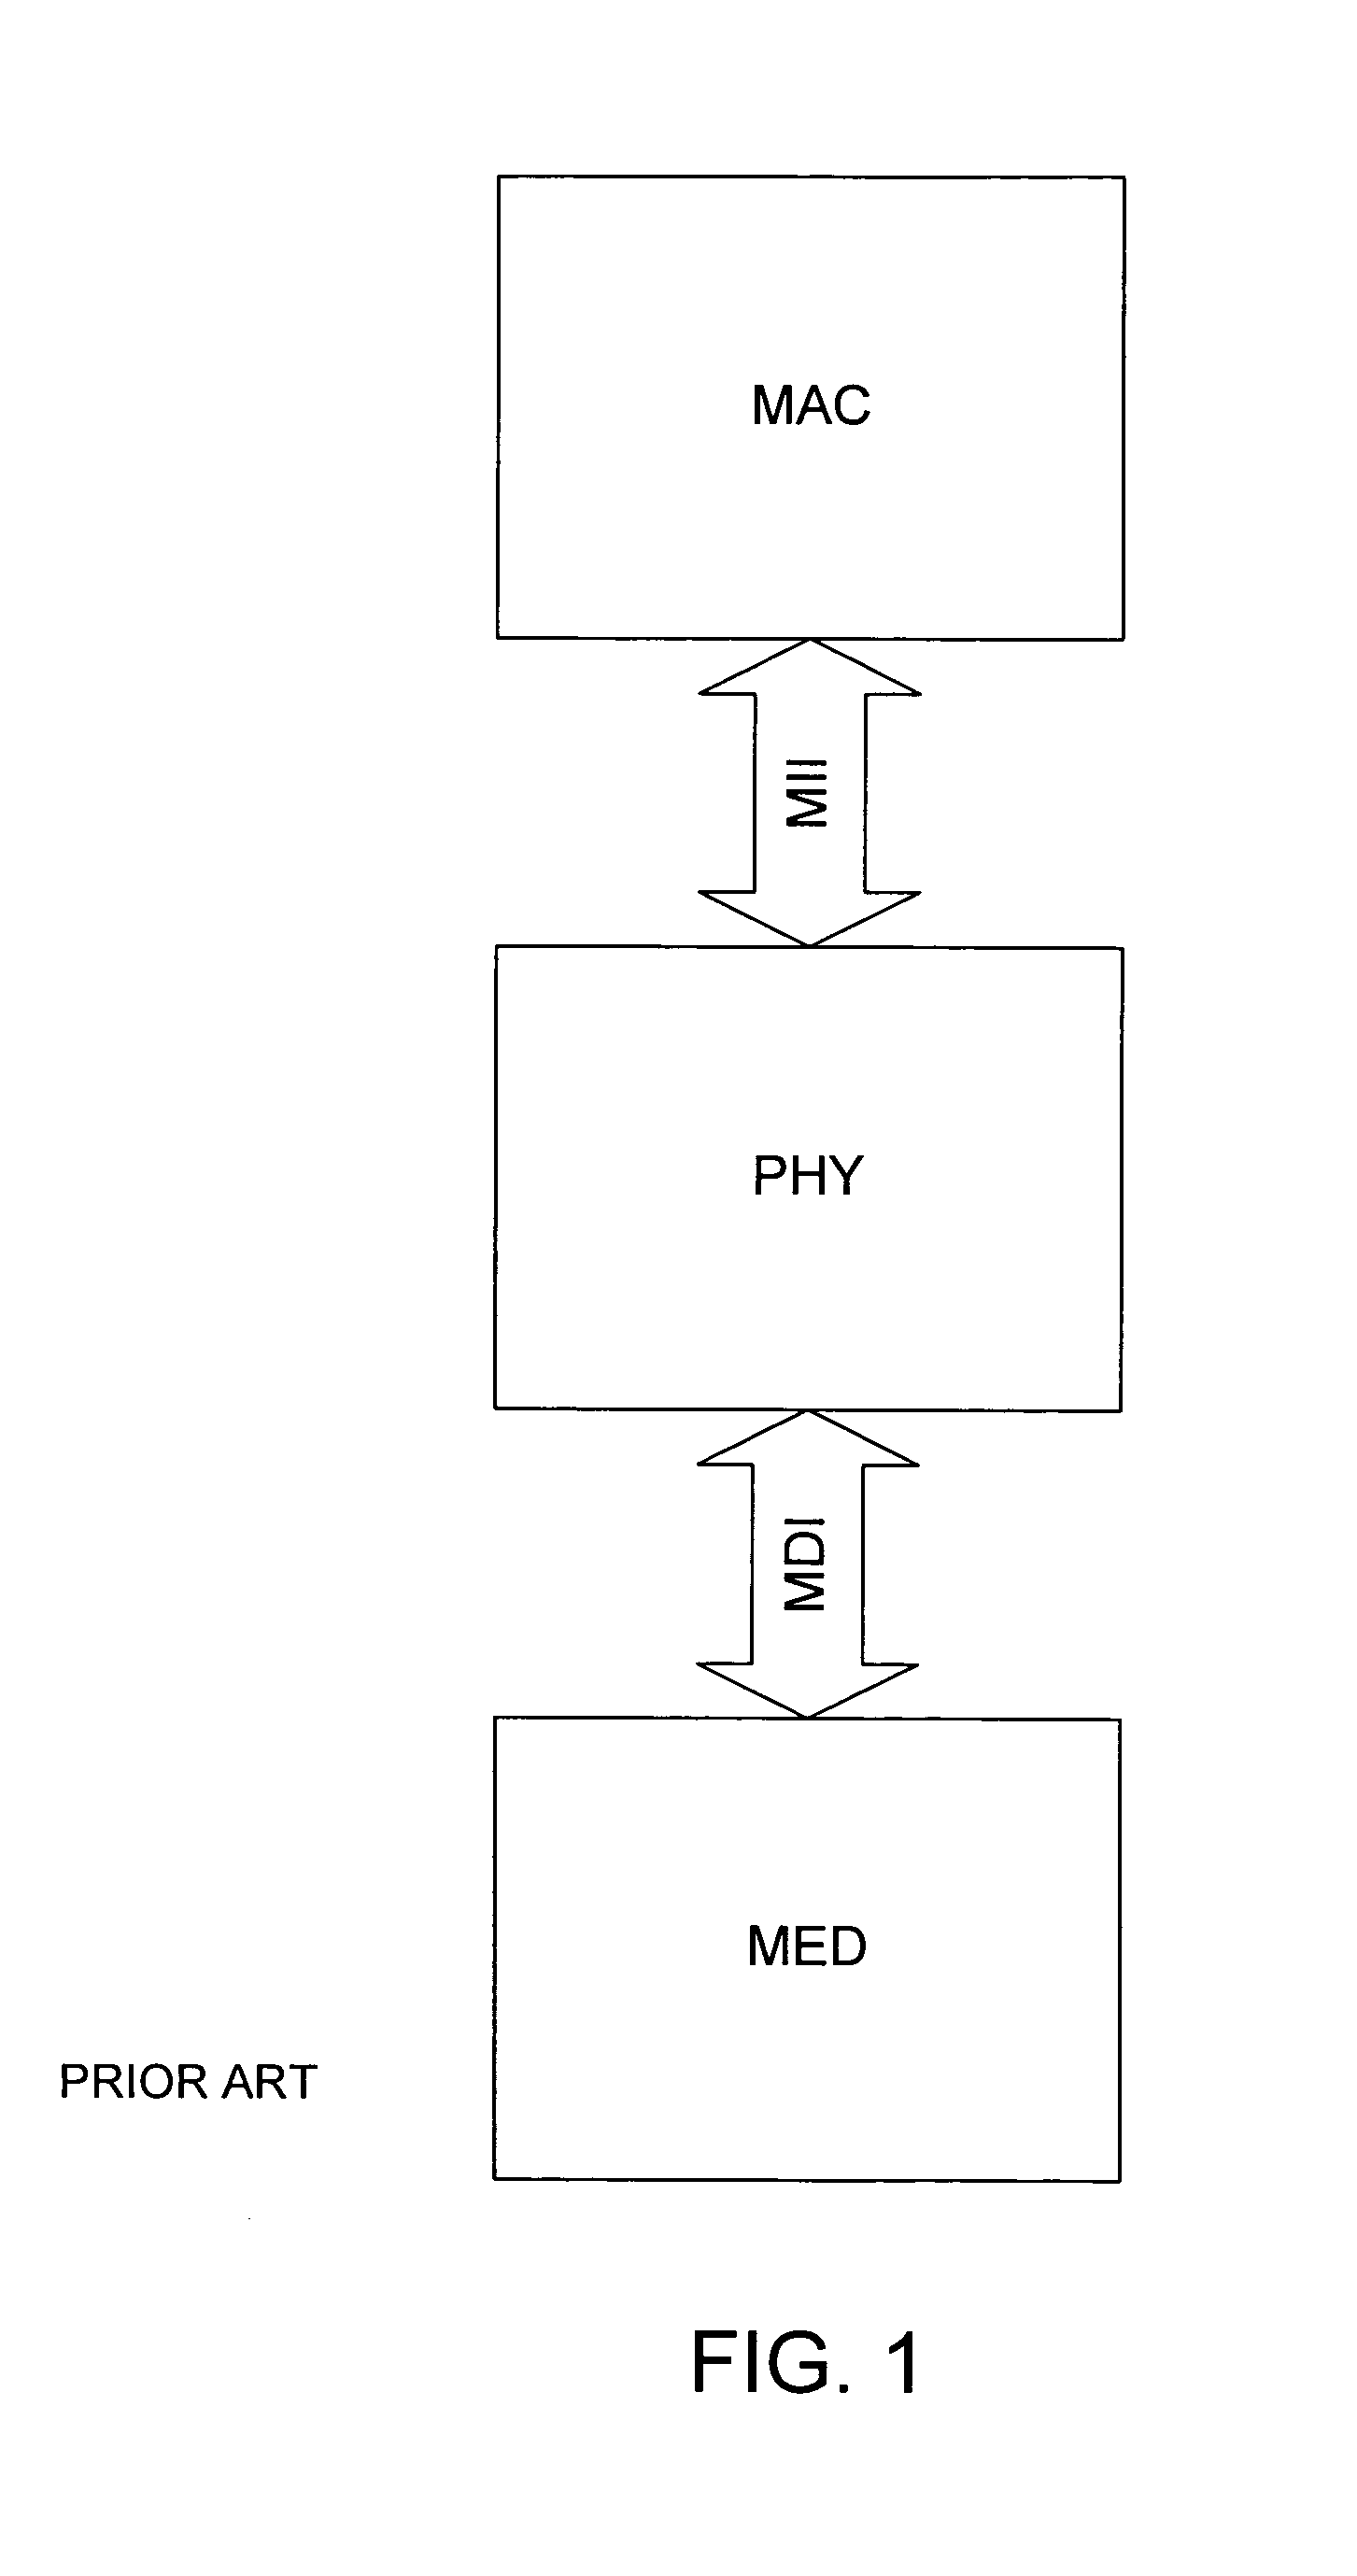 Closed loop method and apparatus for throttling the transmit rate of an ethernet media access controller